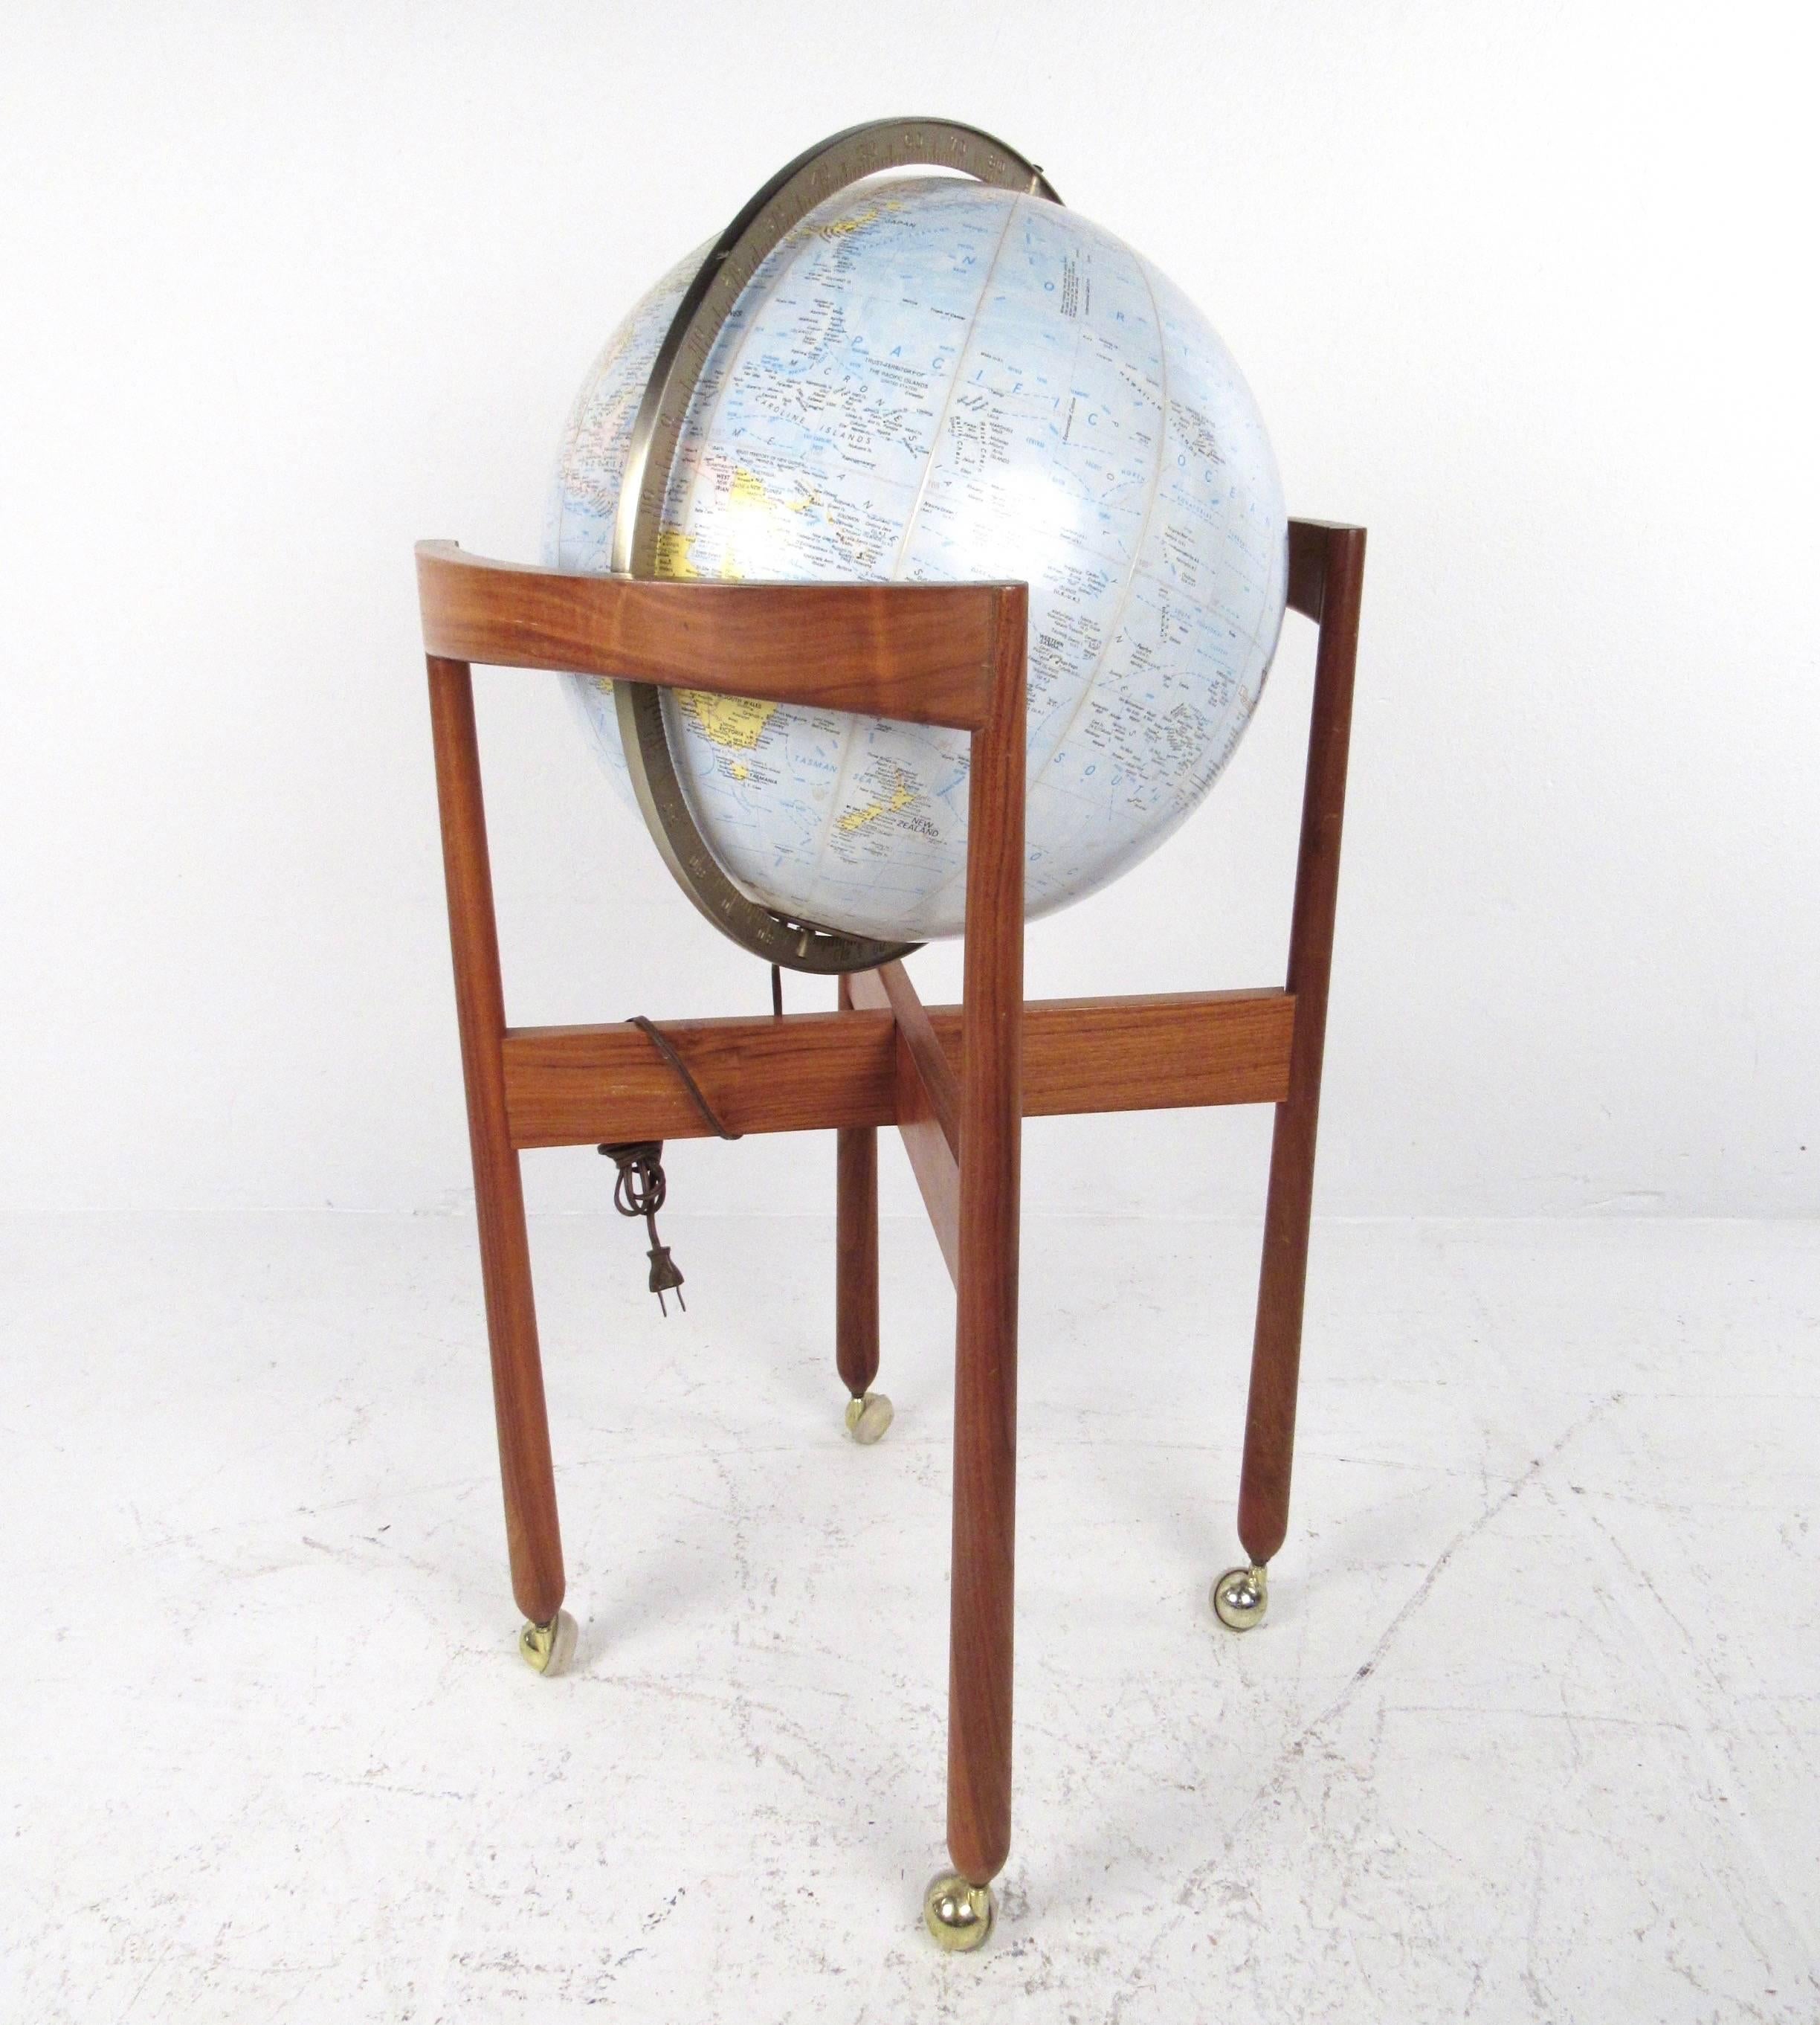 This beautiful vintage globe turns on its axis as mounted on a vintage teak stand. Complete with casters and interior illumination this vintage Replogle comprehensive globe features a vintage world map. Please confirm item location (NY or NJ).